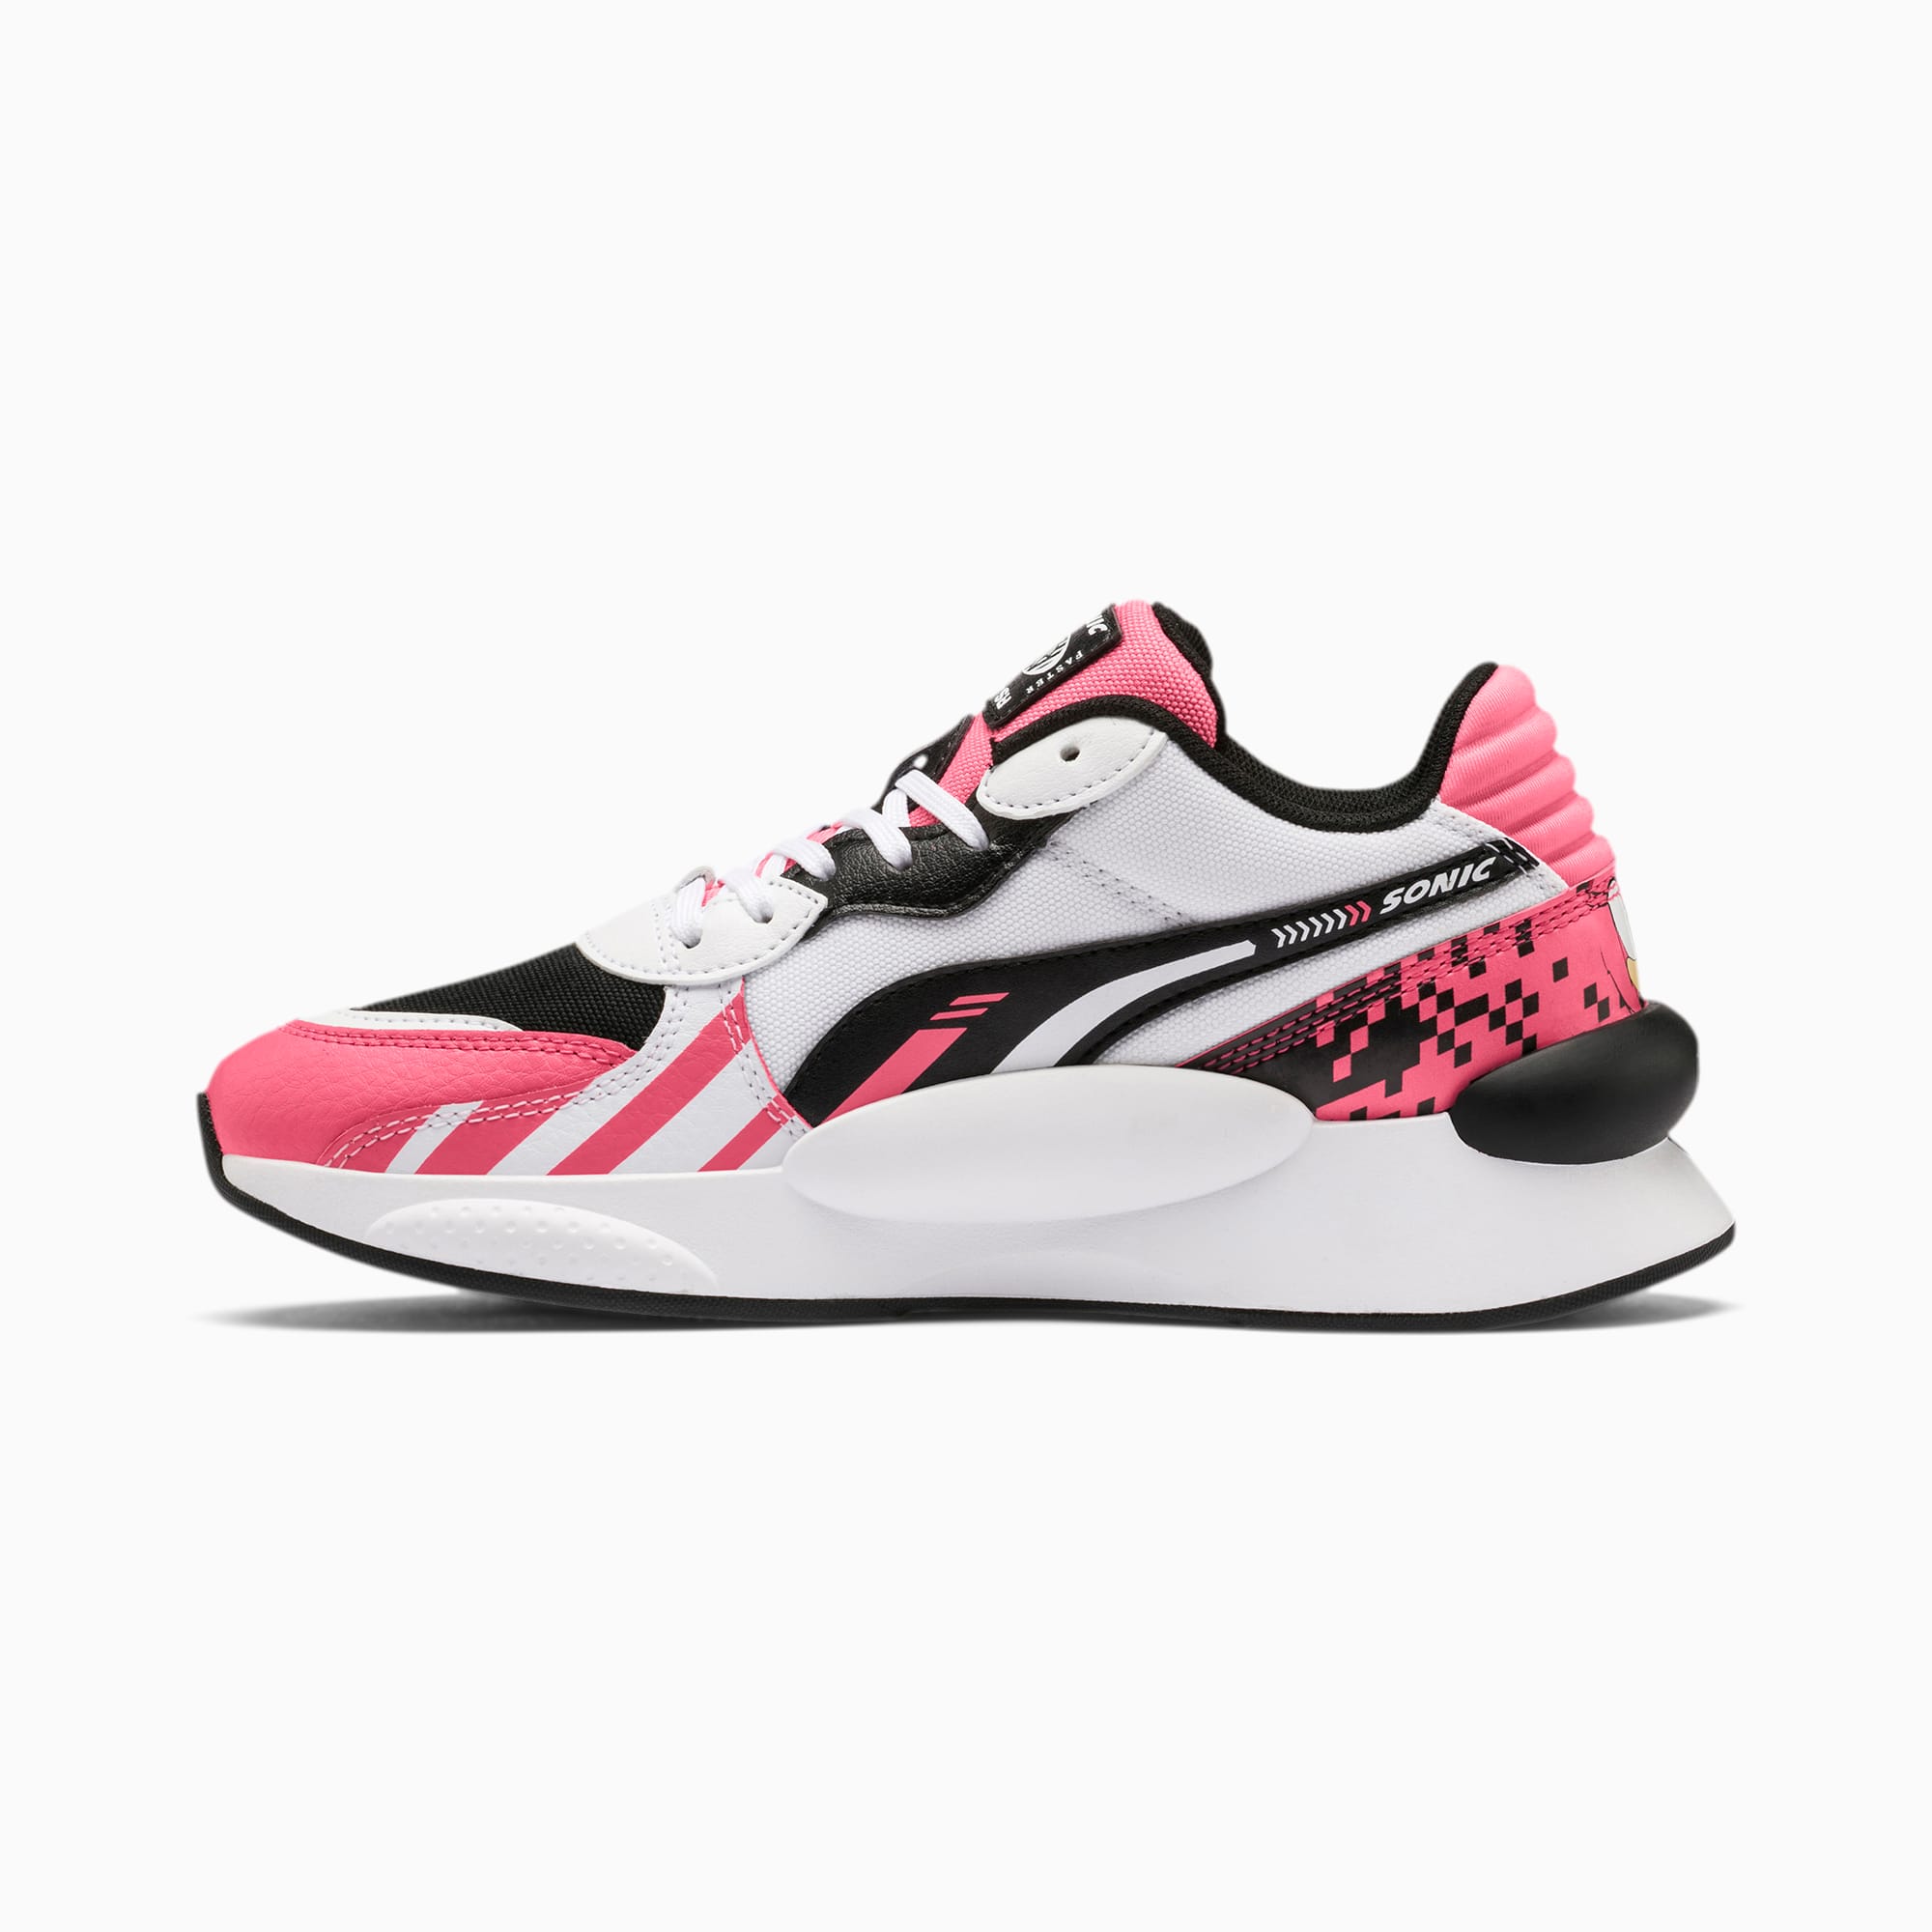 PUMA x SONIC RS 9.8 Youth Trainers 